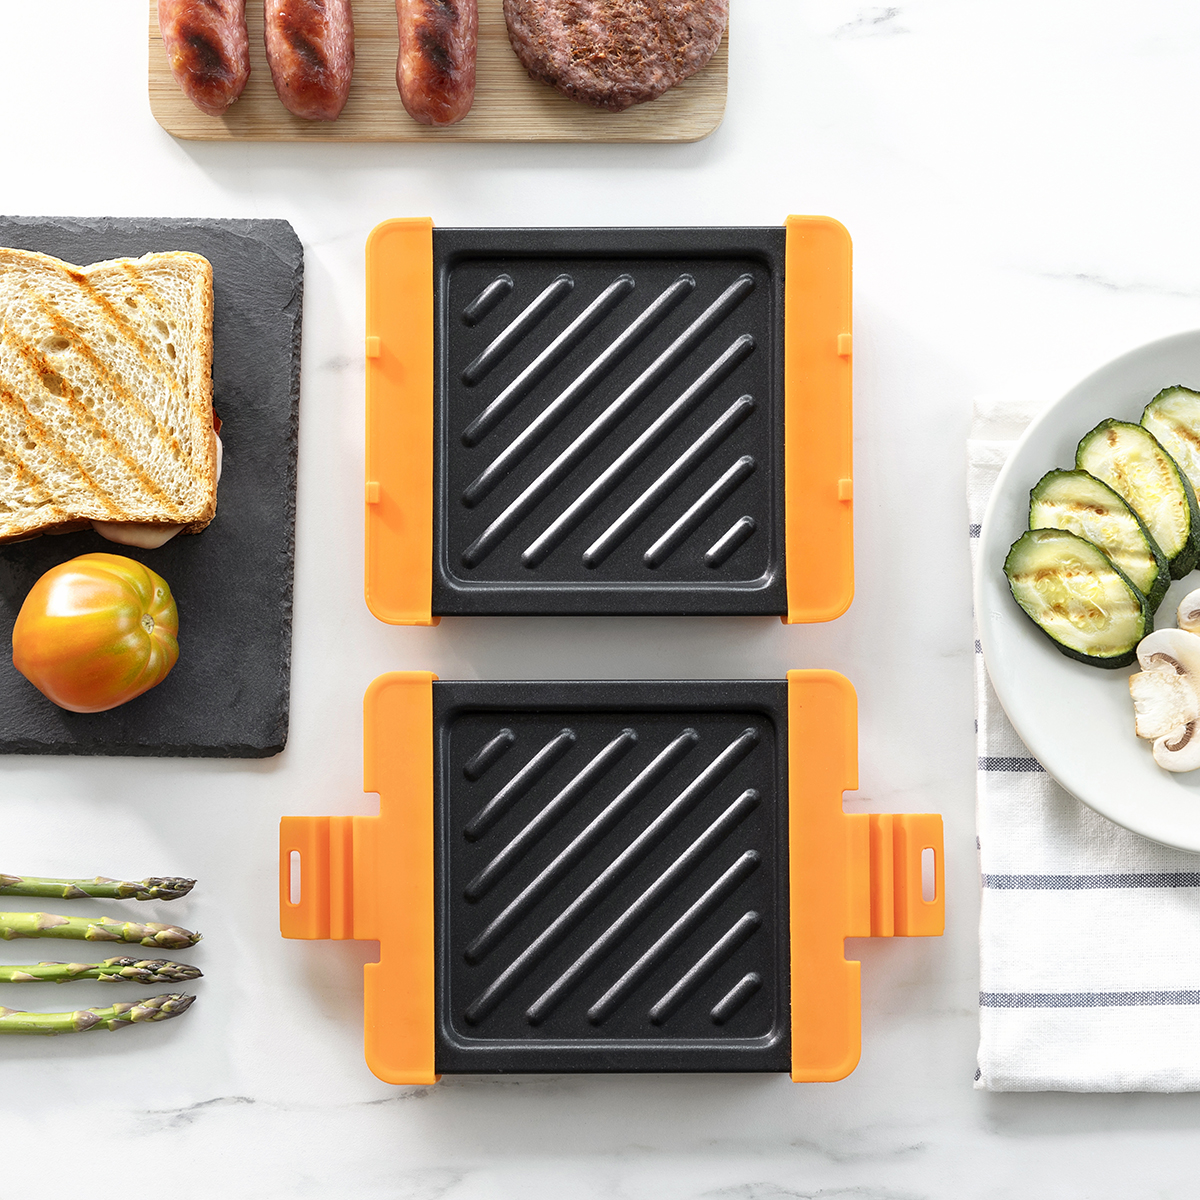 INNOVAGOODS Grillet Mikrowellengrill